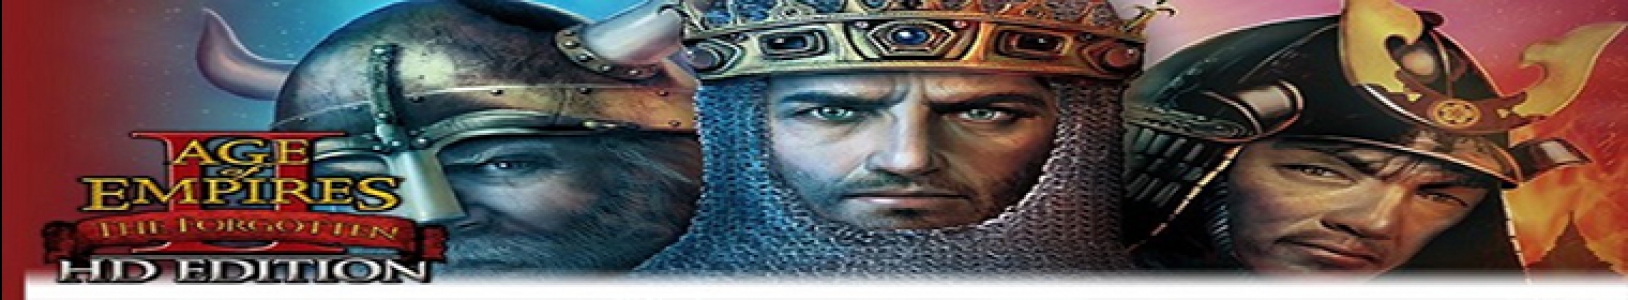 Age of Empires II: The Forgotten banner